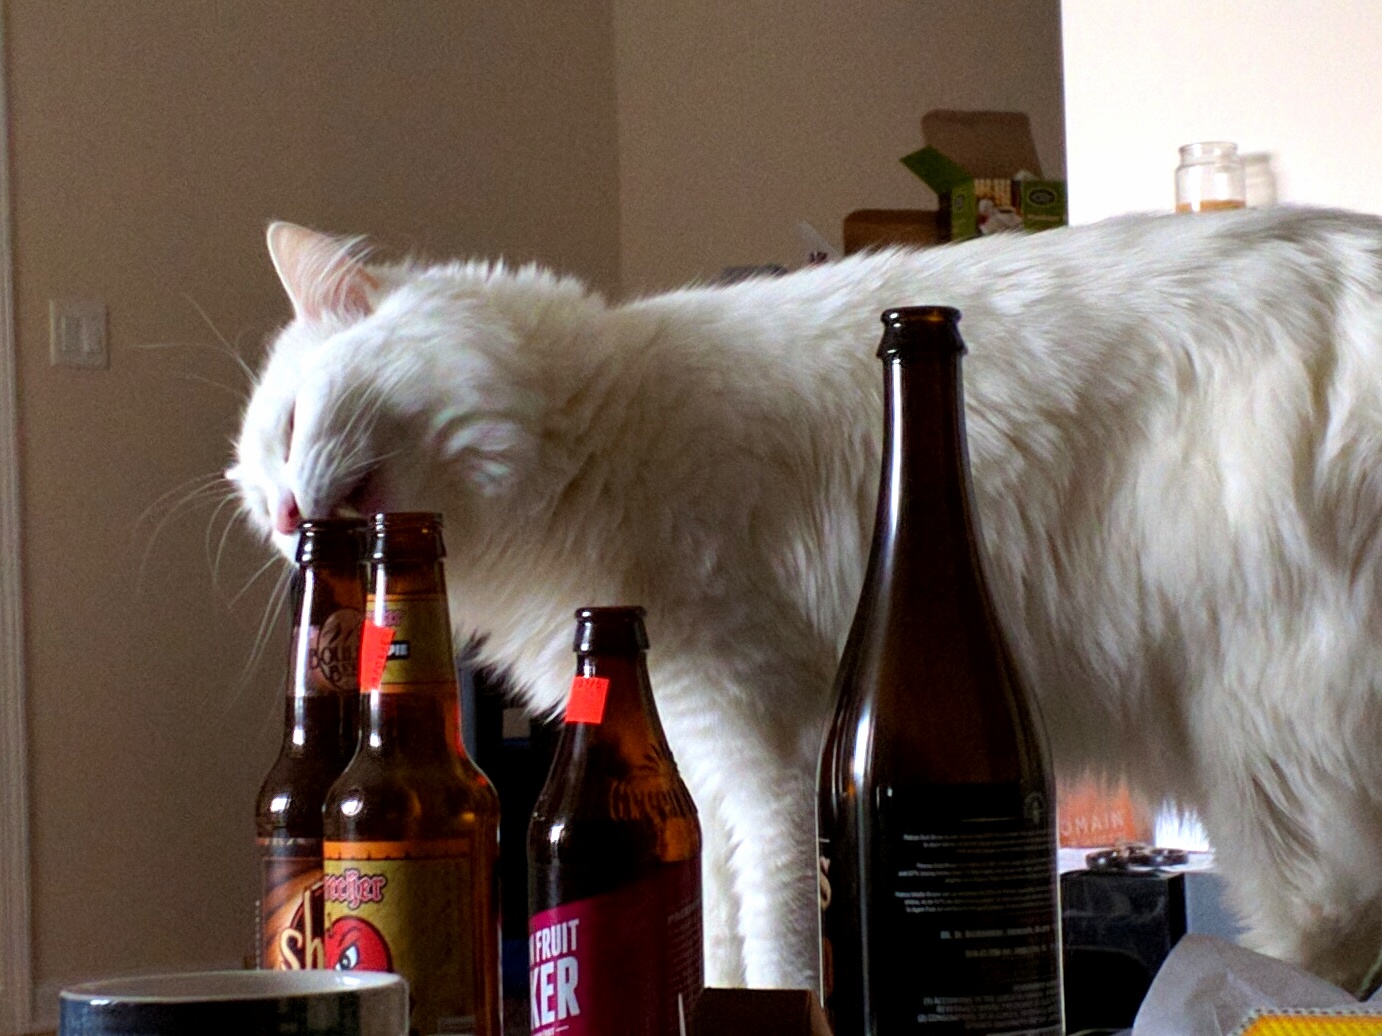 Anyone elses cat lick clean beer bottle spouts